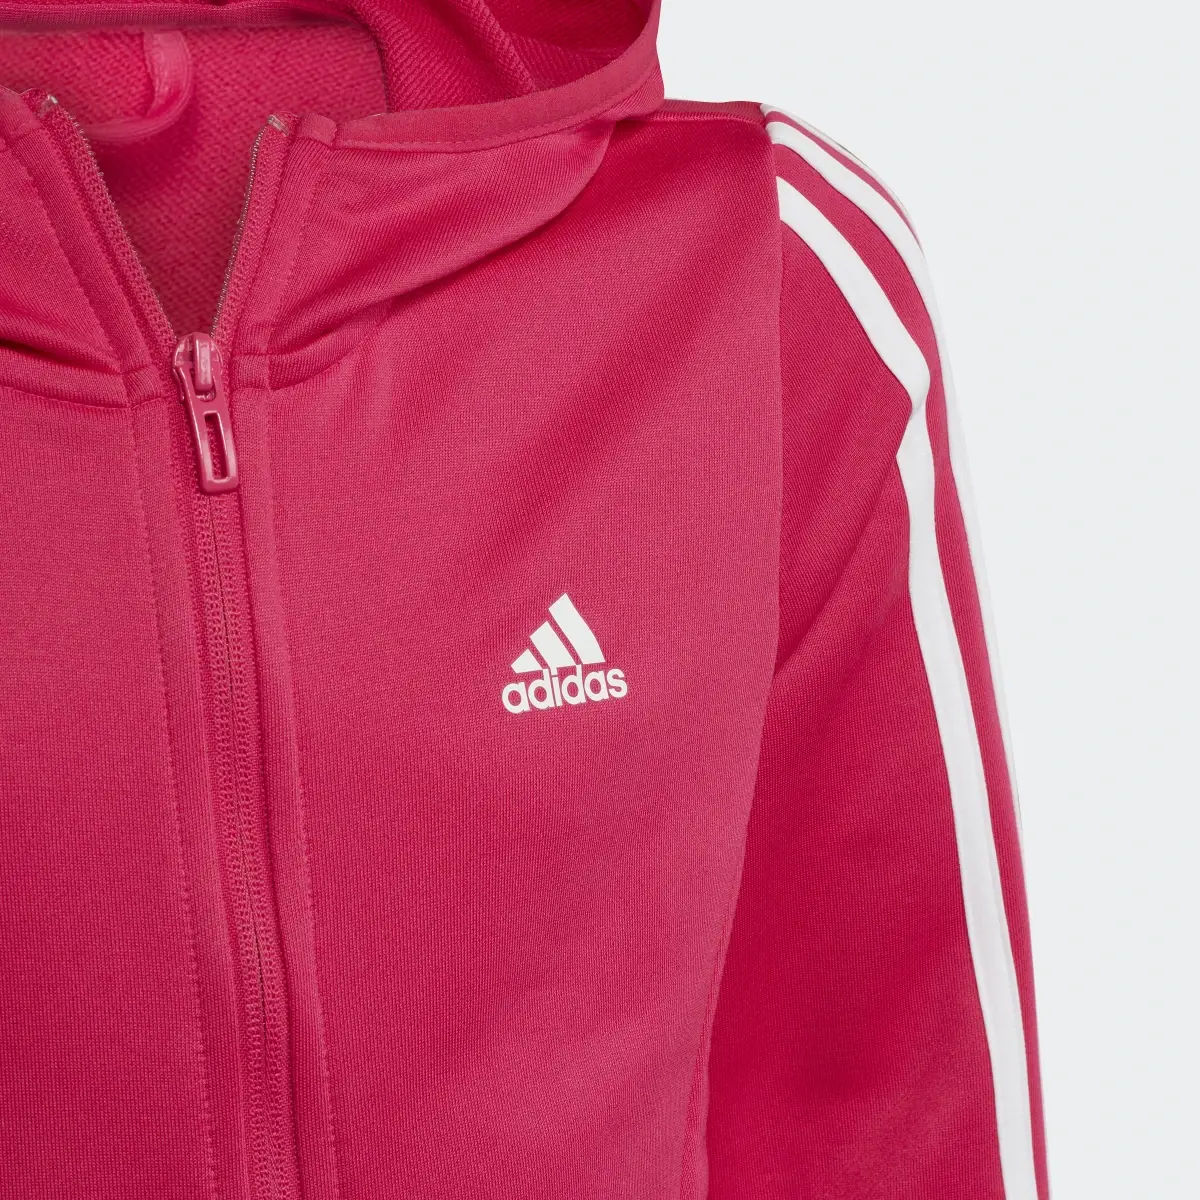 Adidas Designed To Move 3-Stripes Full-Zip Hoodie. 3